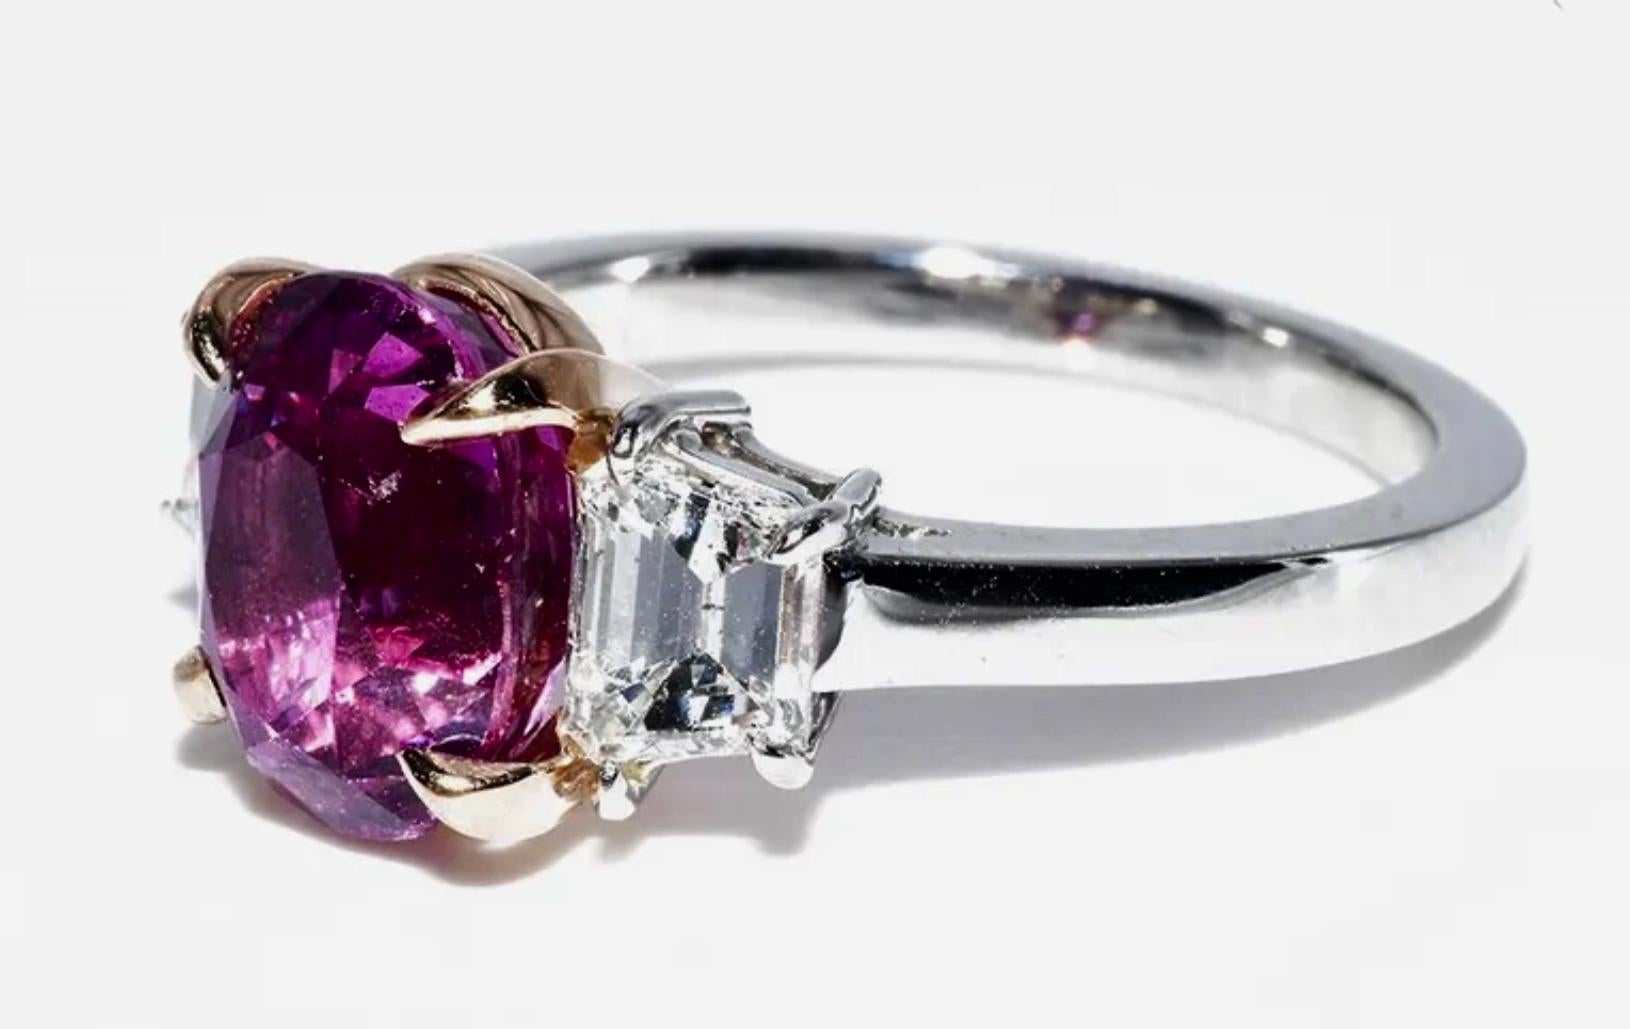 You are looking at a truly breathtaking Pink Sapphire and Diamond three stone engagement ring
 that is newly crafted in solid platinum and 18K Y.G. The ring features a truly gorgeous!

AGL Certified:
This super elegant and classy three stone ring is